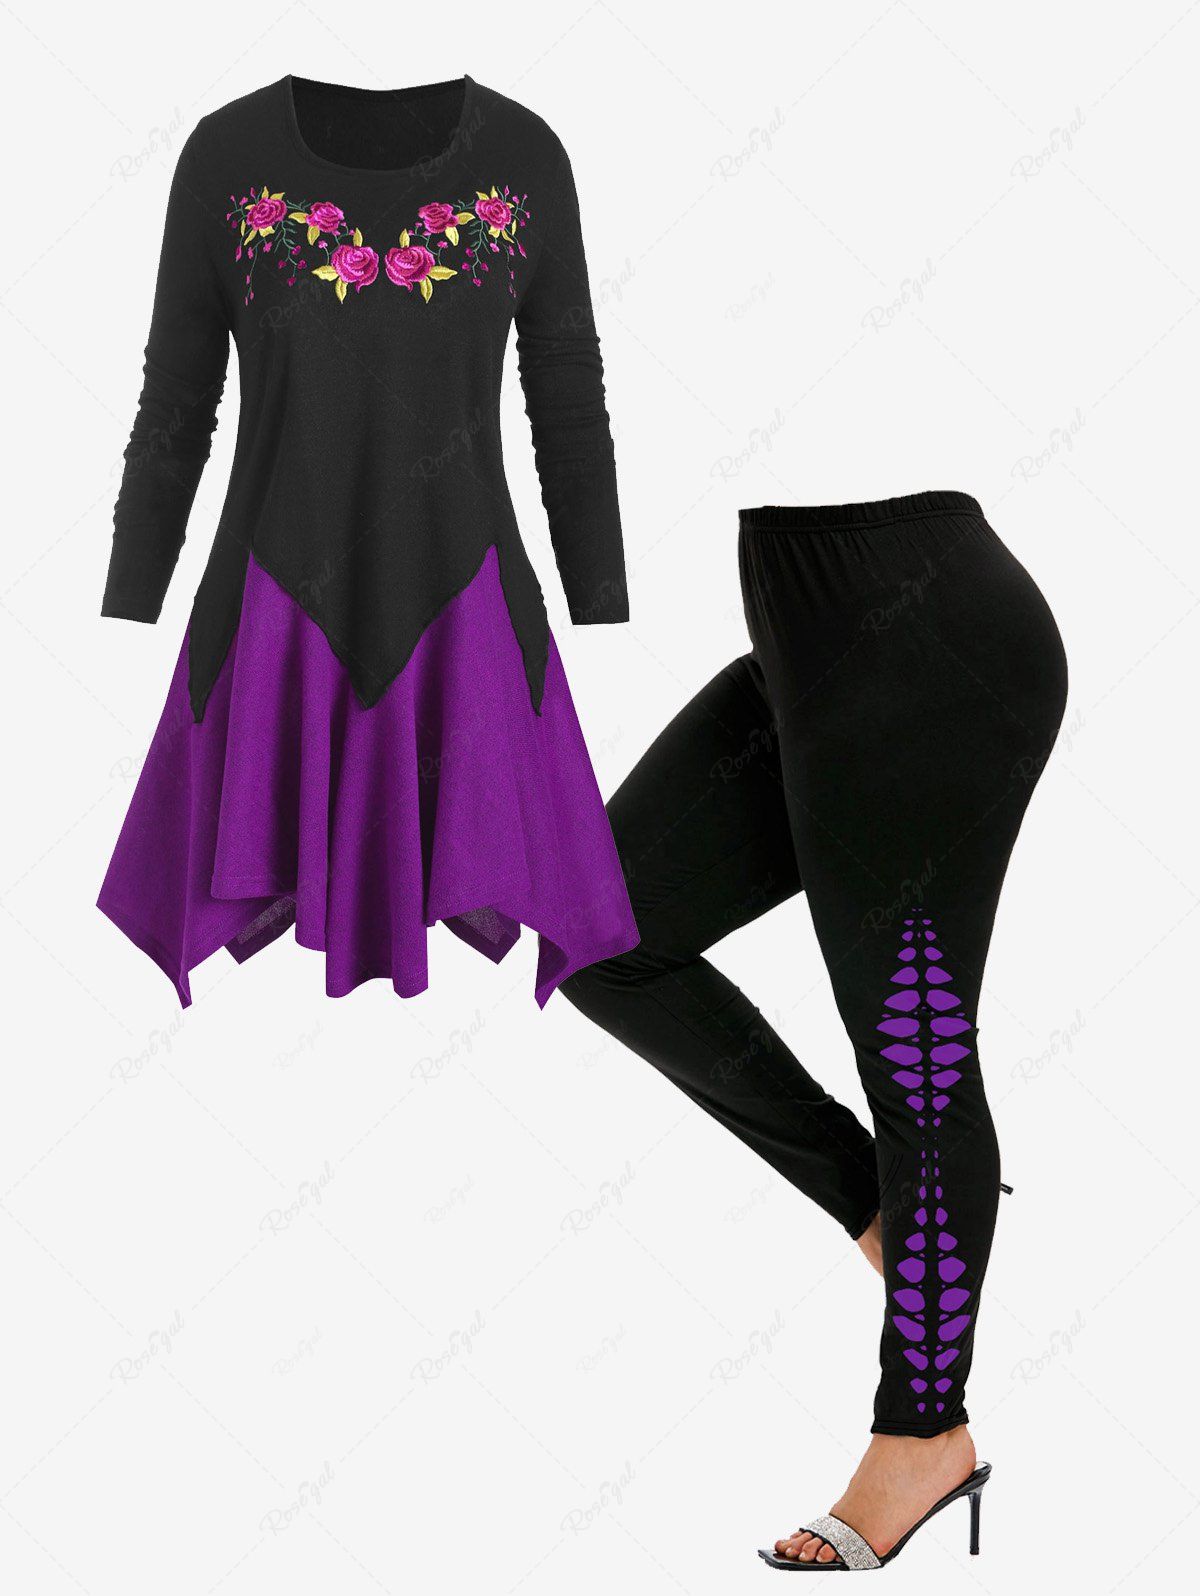 Shop Floral Embroidered Two Tone Handkerchief Knitwear and Skeleton Printed Leggings Plus Size Outfit  